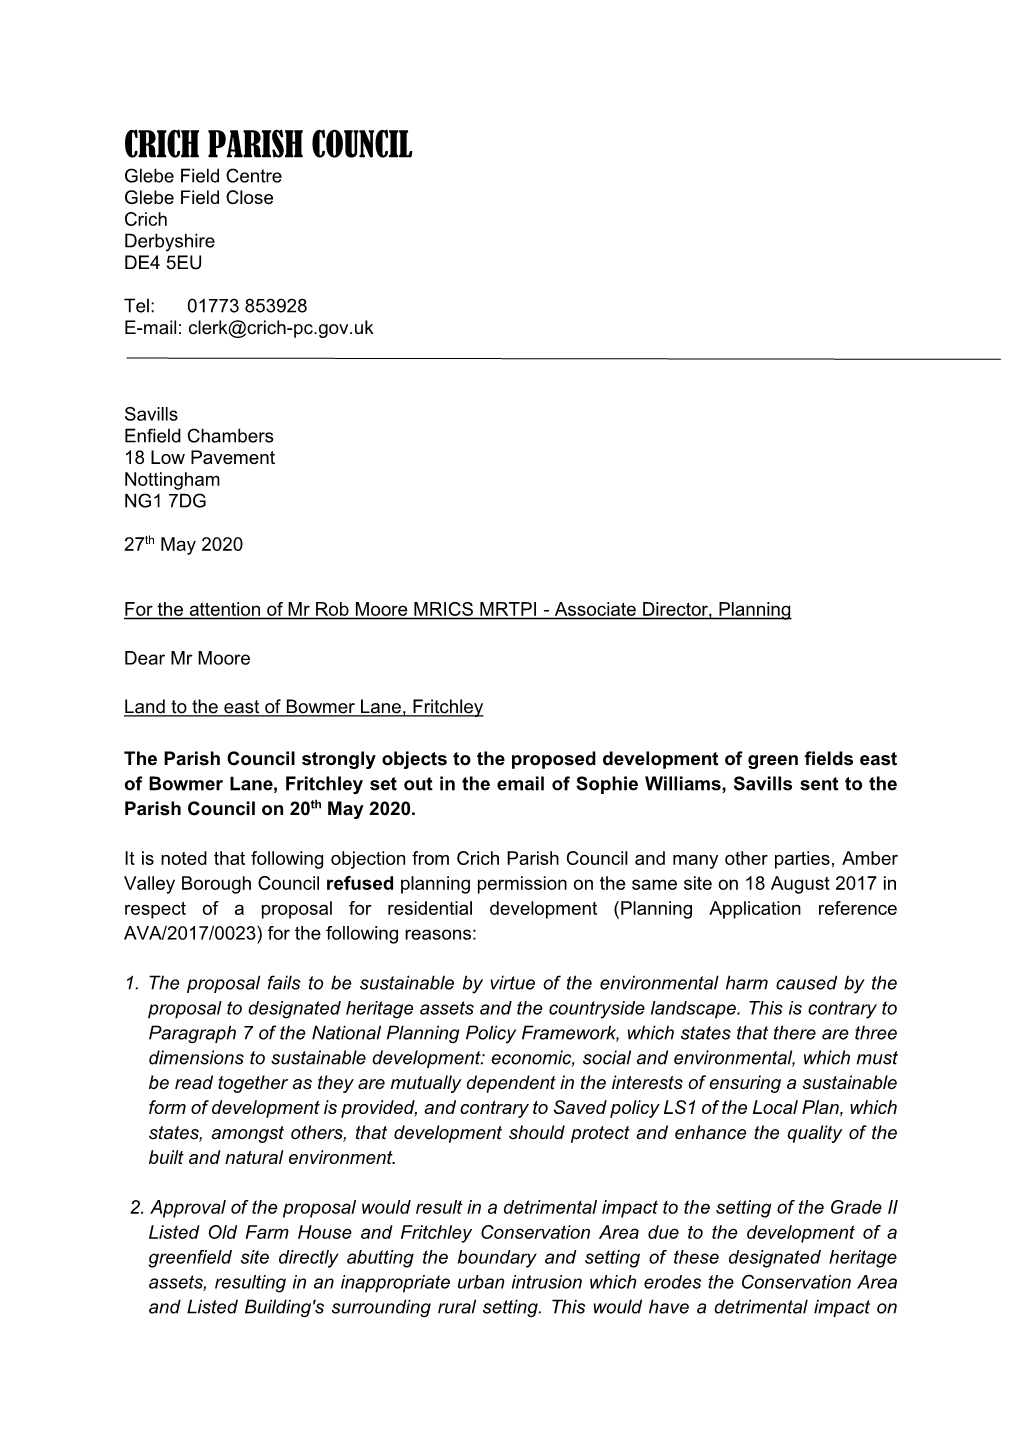 Proposed Development of Green Fields East of Bowmer Lane, Fritchley Set out in the Email of Sophie Williams, Savills Sent to the Parish Council on 20Th May 2020